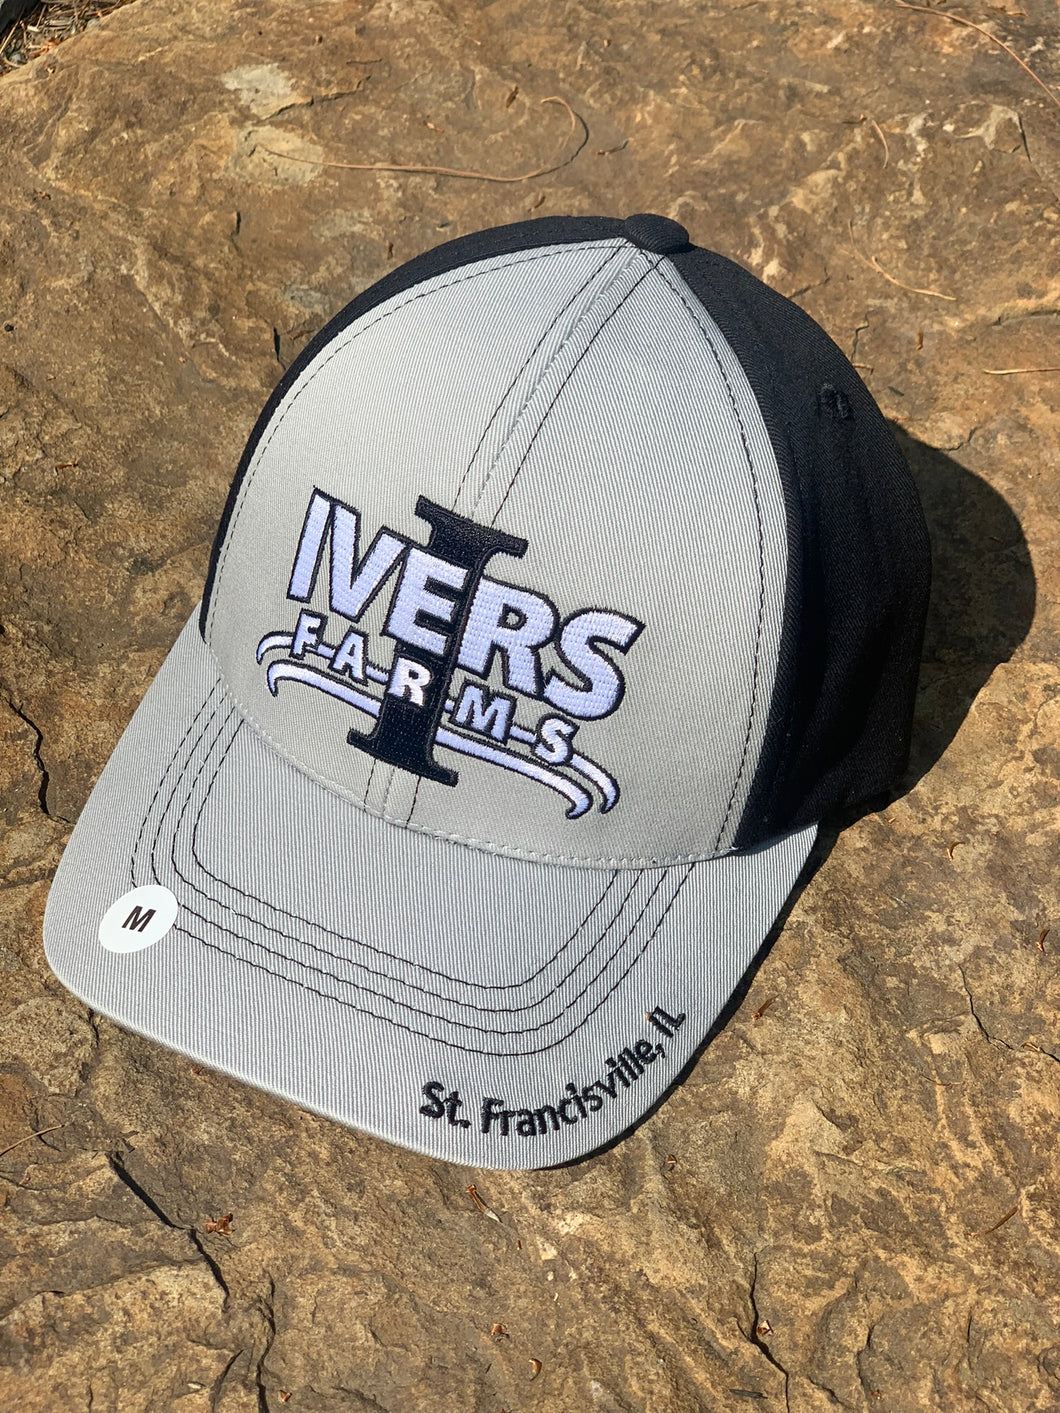 *New Fitted Ivers Farms Logo Hat